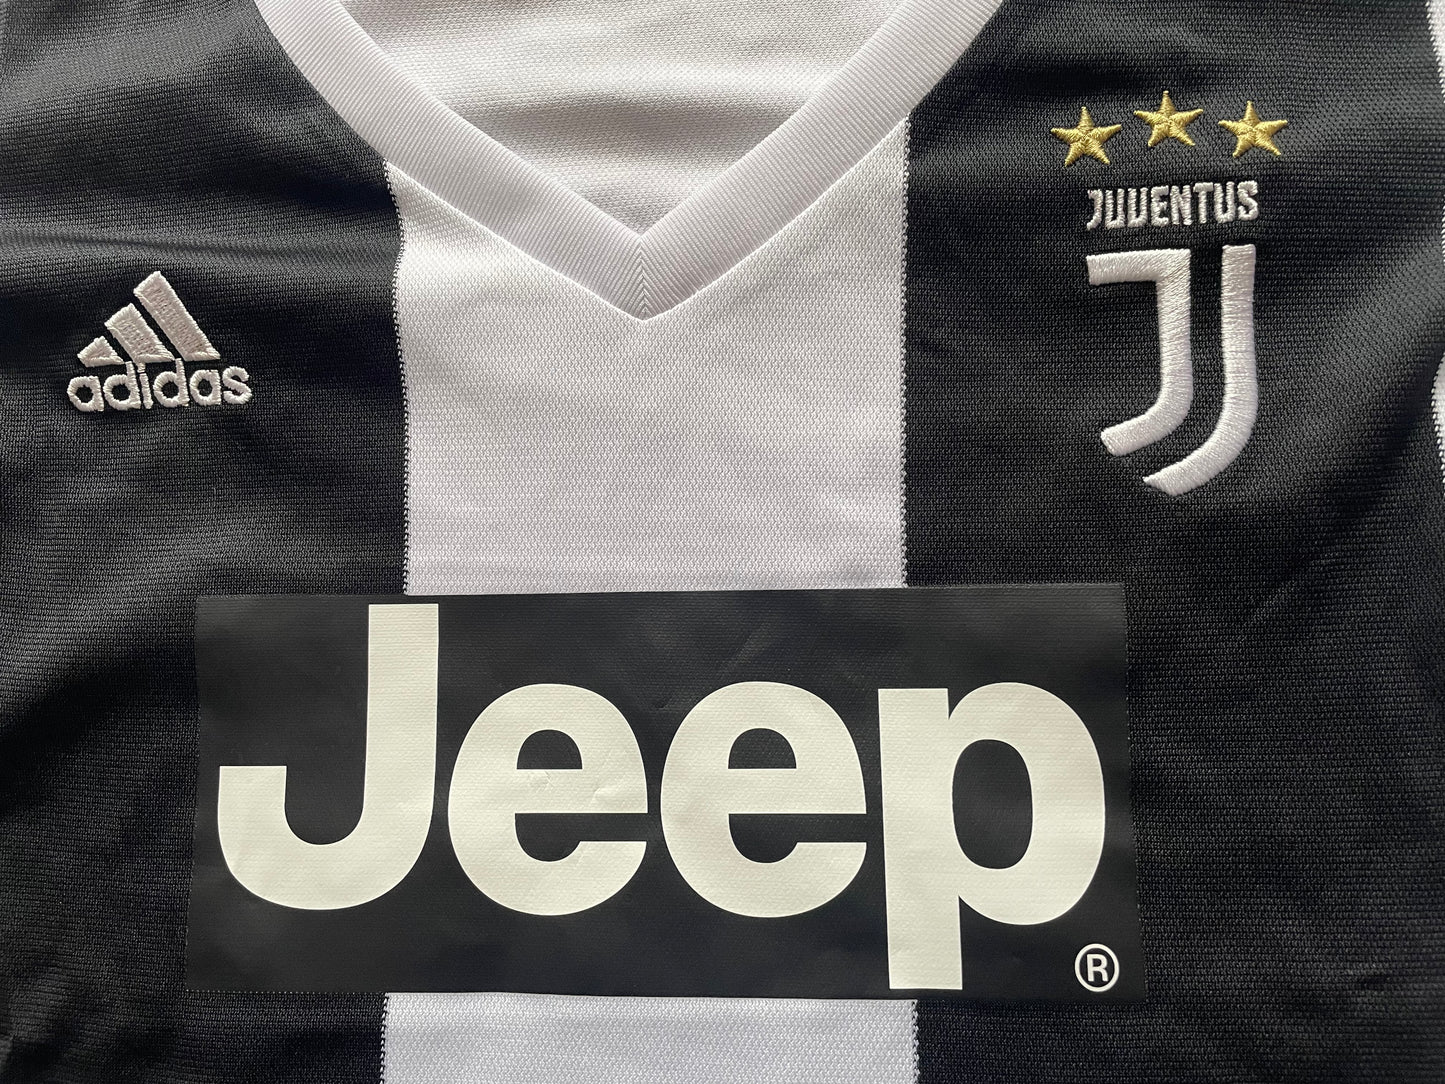 Juventus 2018 Home Shirt (excellent) Ladies Small 8 to 10